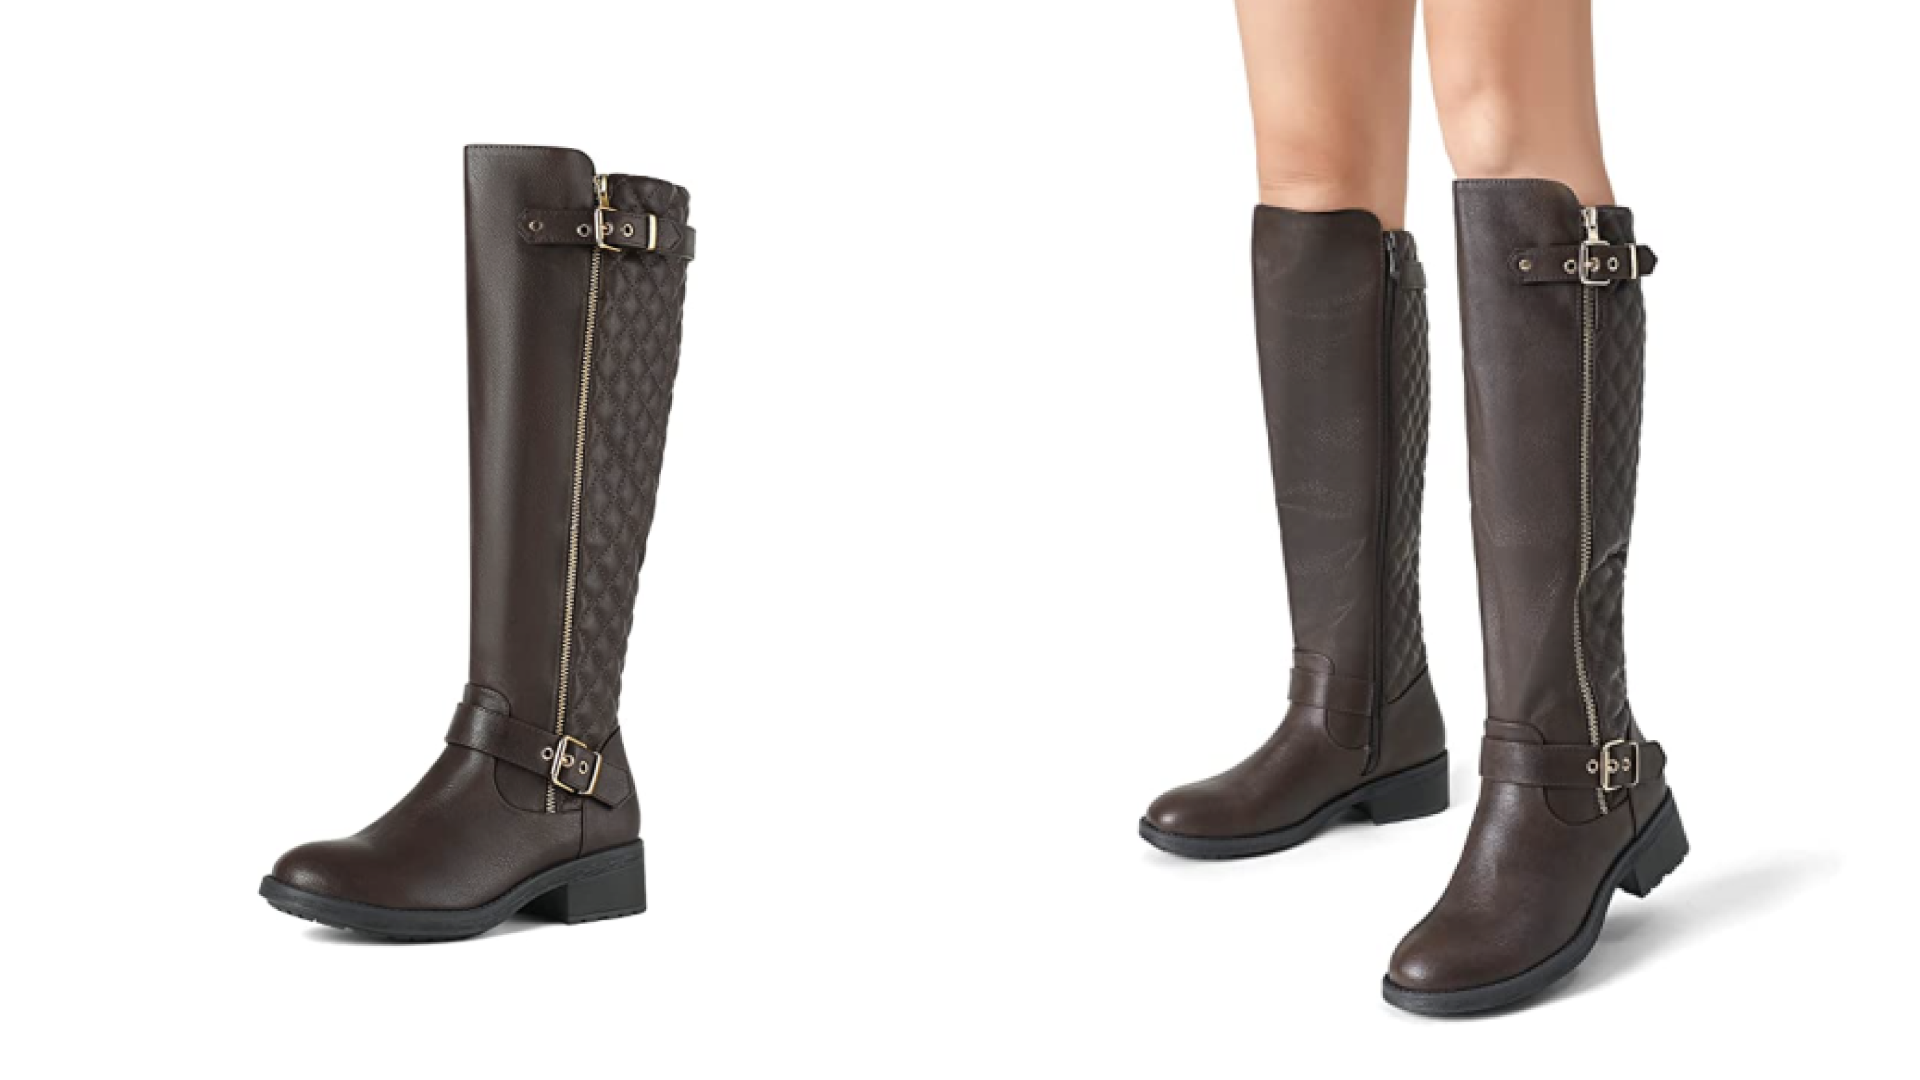 The Best Wide Calf Boots and Where to Buy Them - Nita Danielle